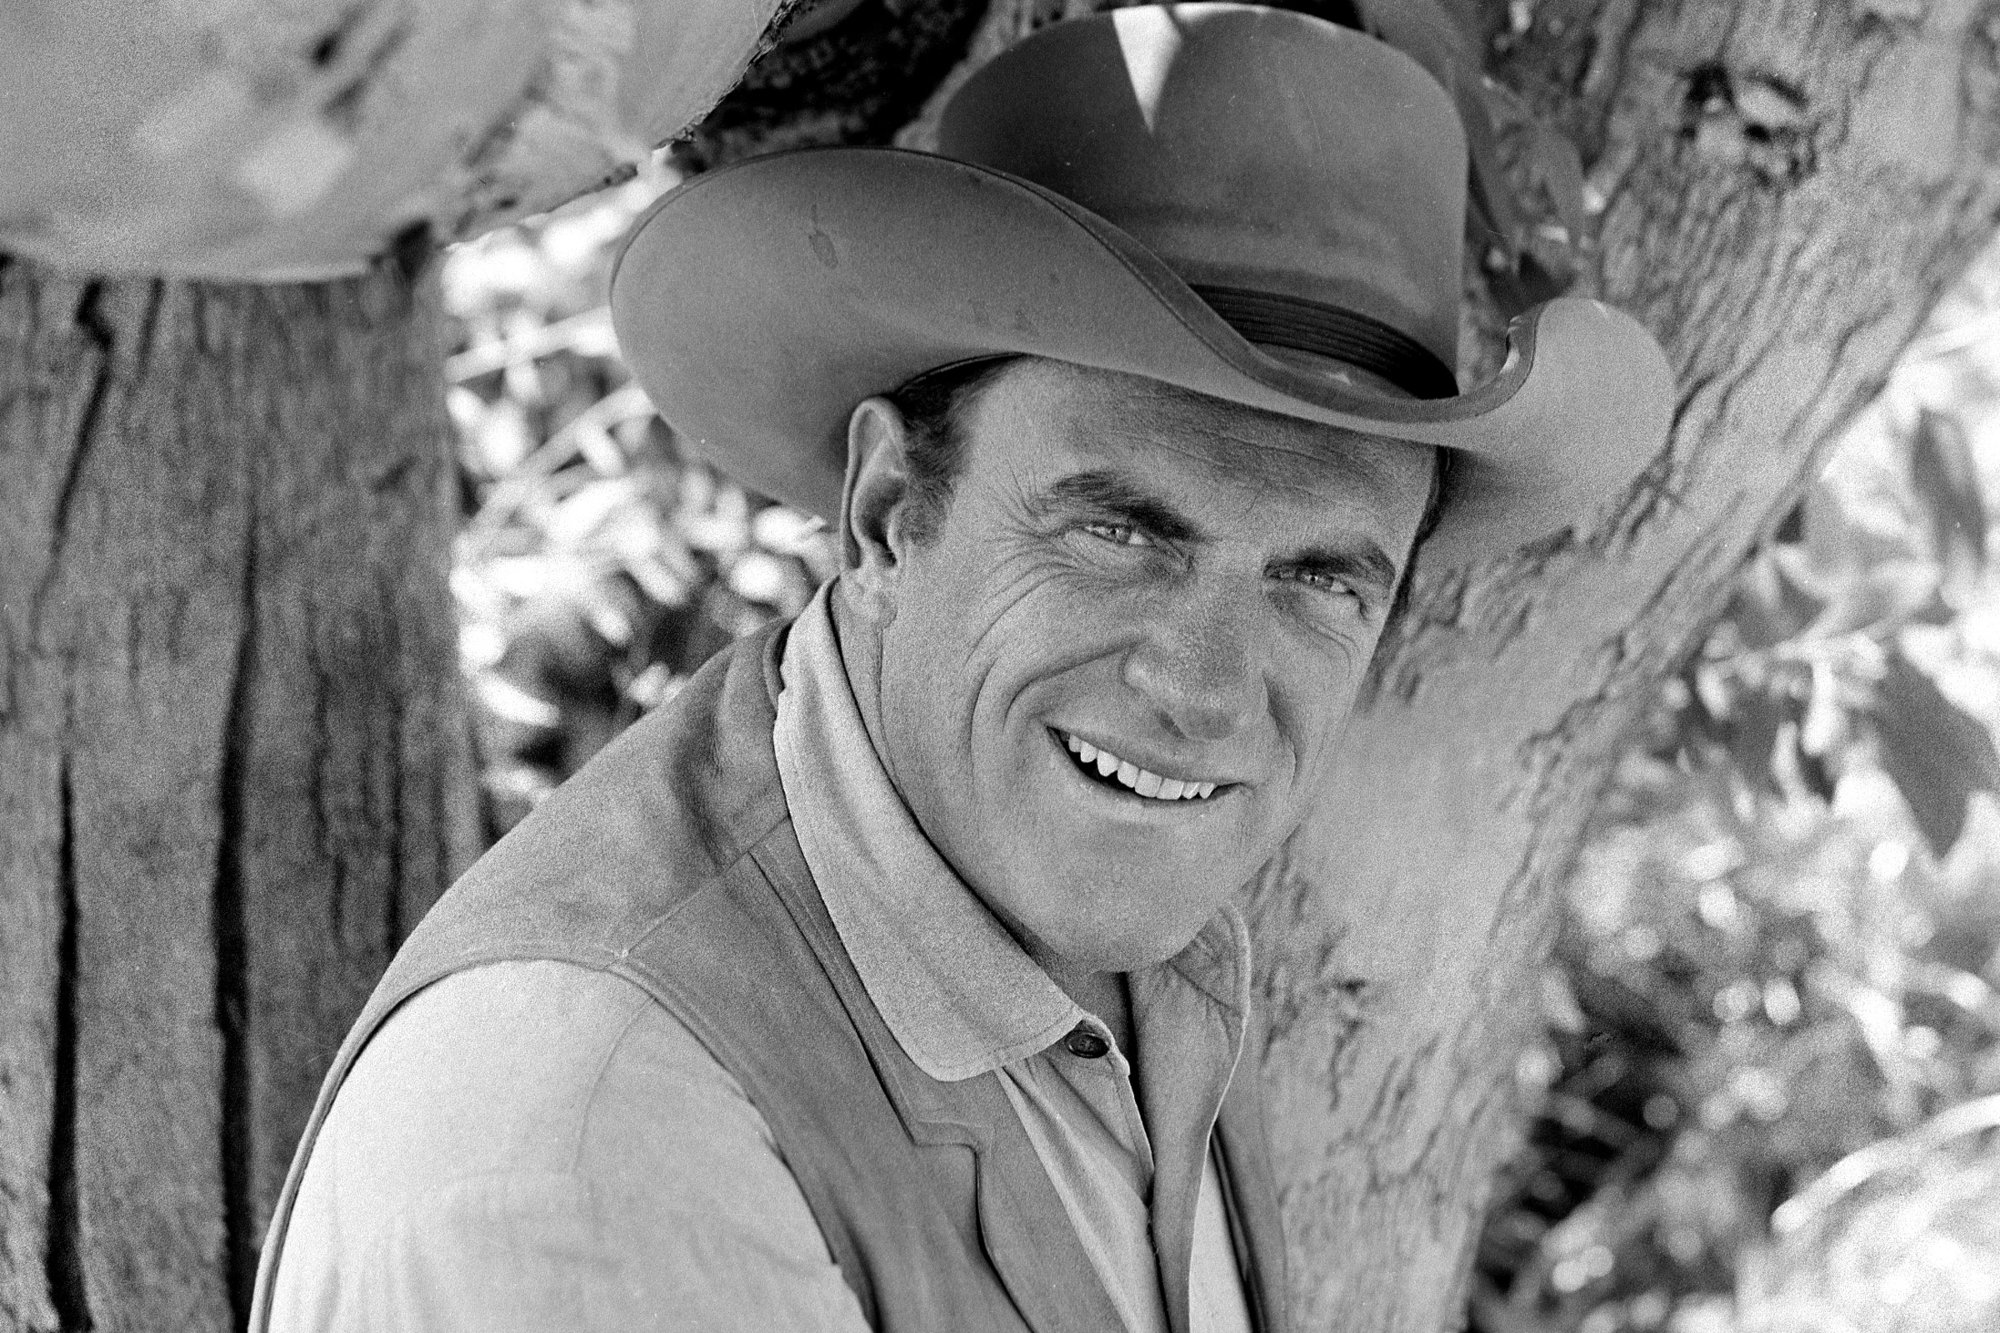 'Gunsmoke' James Arness as U.S. Marshal Matt Dillon, whose death came from natural causes. A black-and-white picture with Arness wearing a cowboy hat, collared shirt, and vest. He's standing in front of a tree.